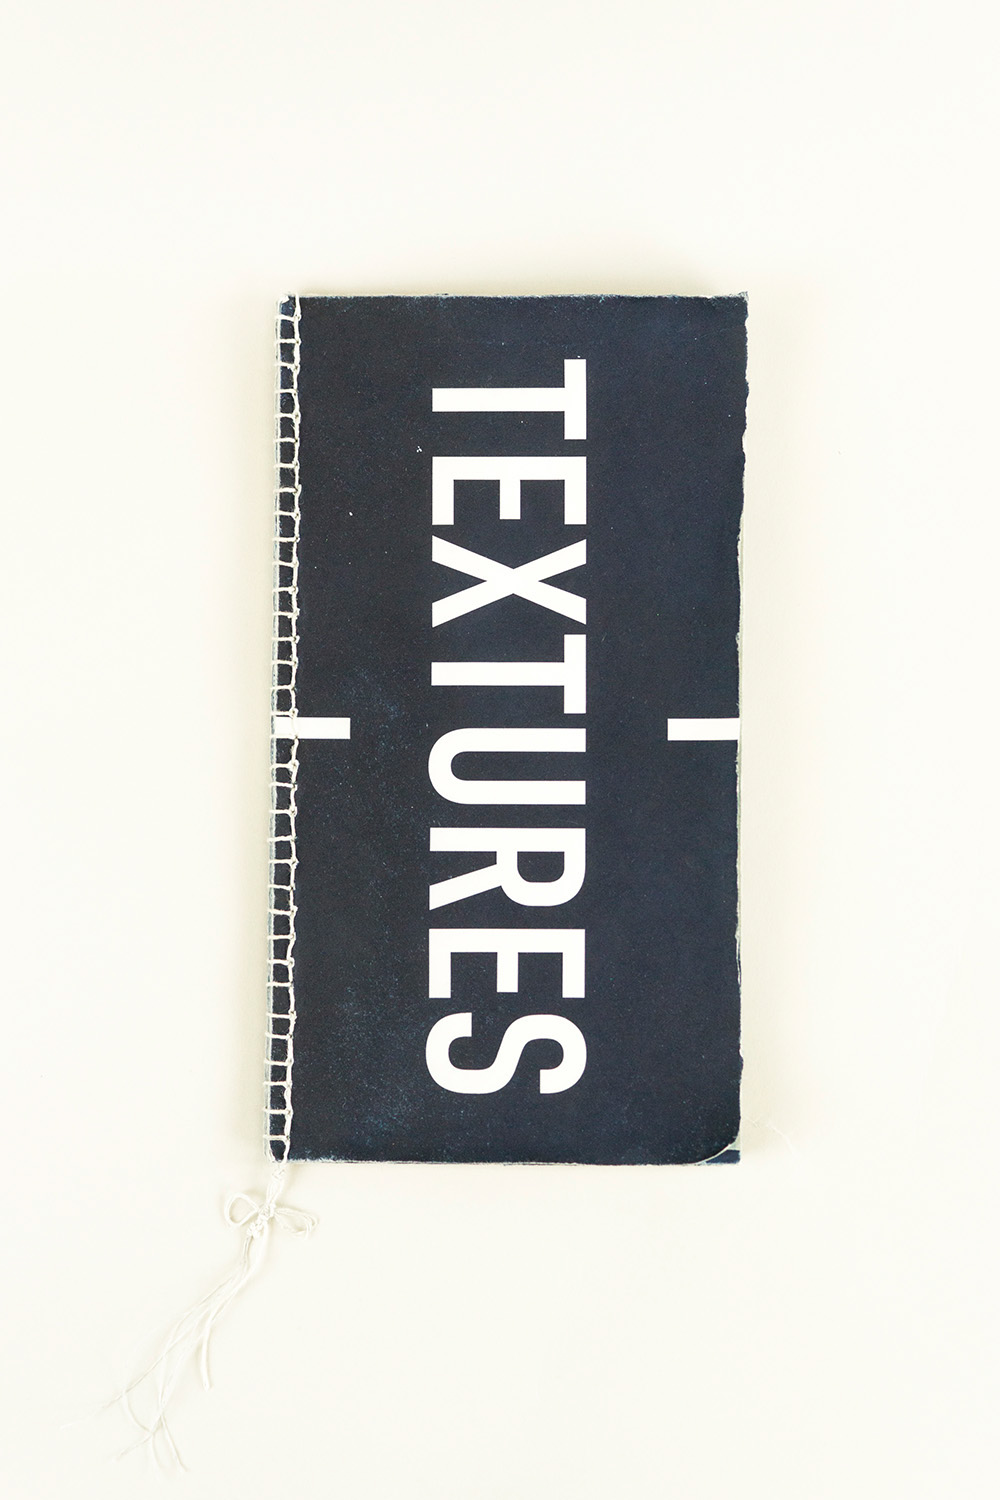 textures book blue obsession cyanotype print antique